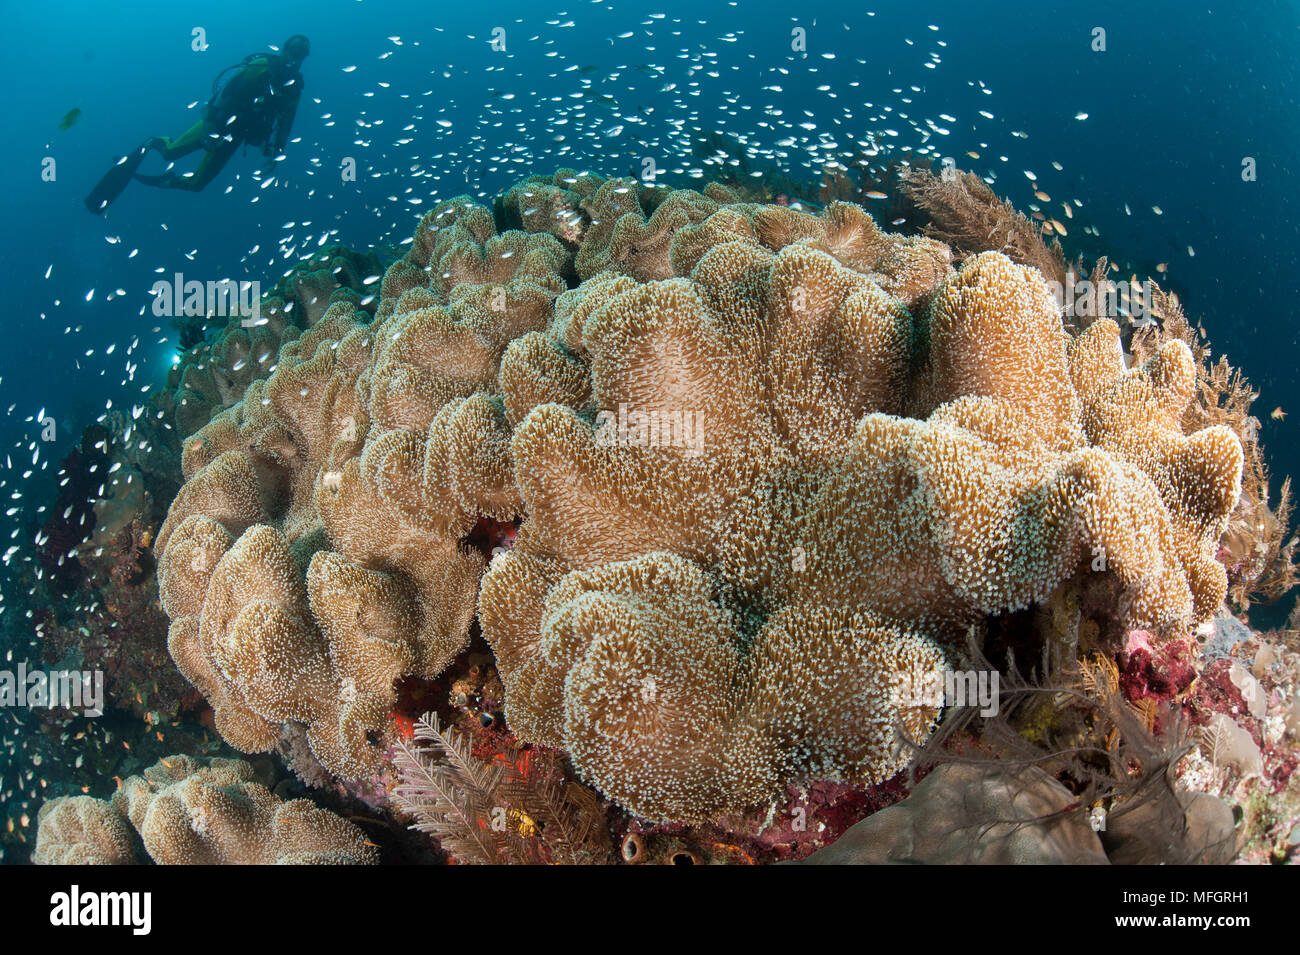 Diver approaching large group of mushrrom leather coral (Sarcophyton sp.), Raja Ampat, Indonesia Stock Photo